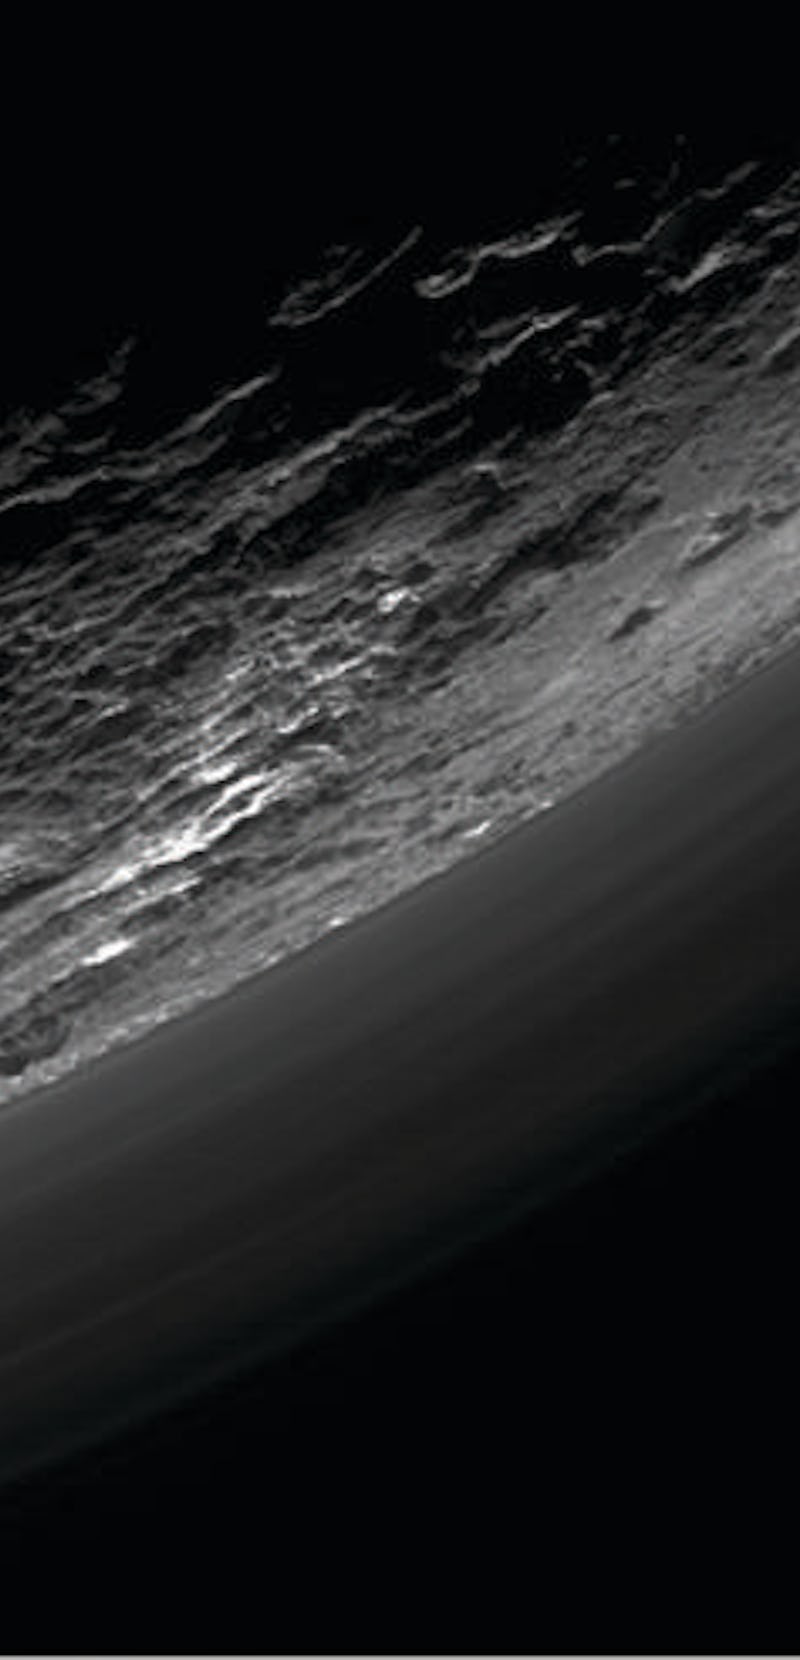 The haze above Pluto's surface